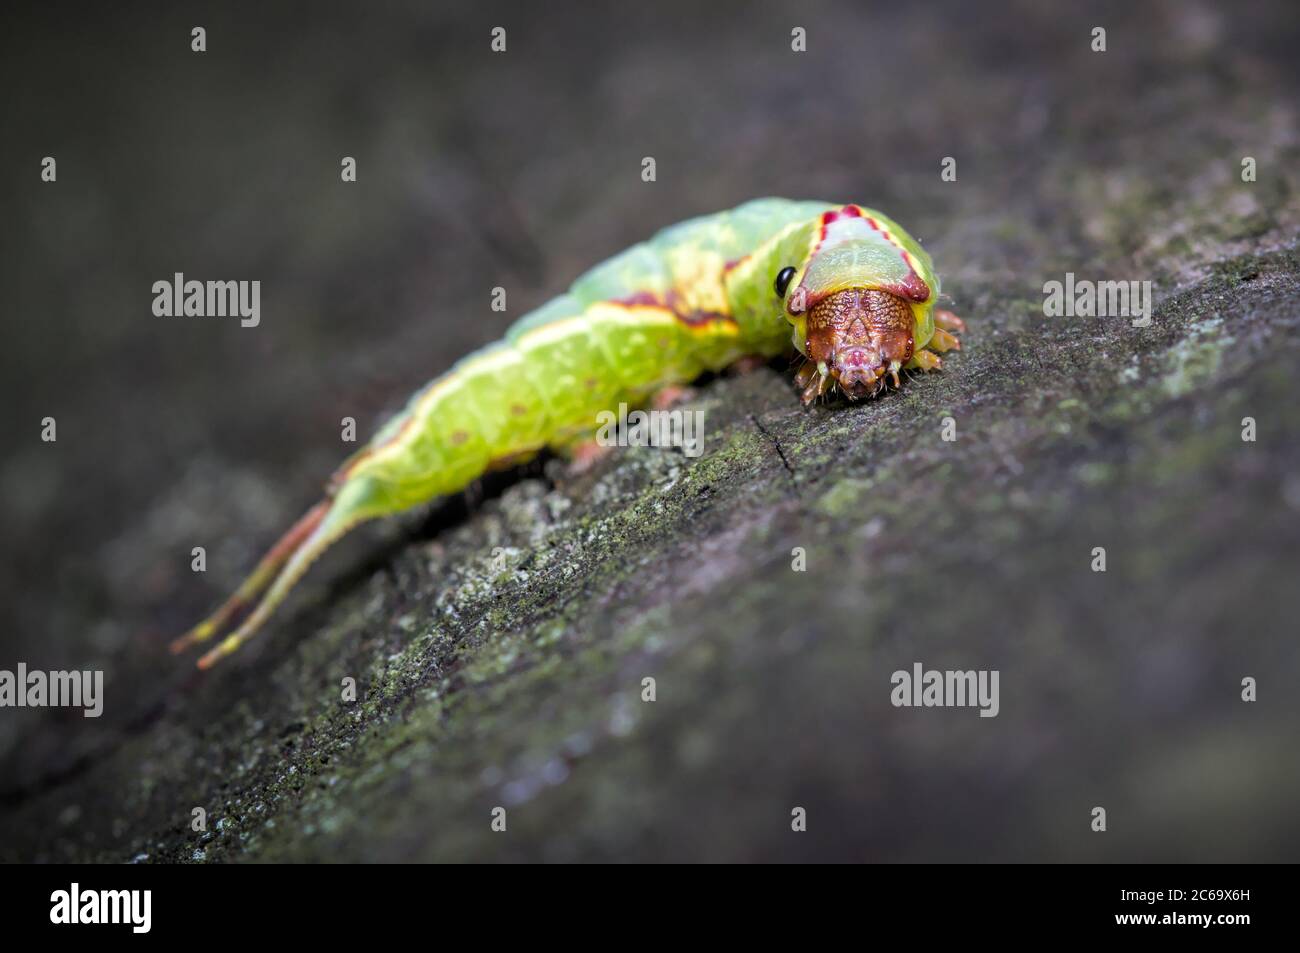 Caterpillar, Larva Of A Puss Moth, Cerura Vinula, Crawling On A Log Isolated Against A Black Background Showing Parasite On The Thorax. Taken at Blash Stock Photo